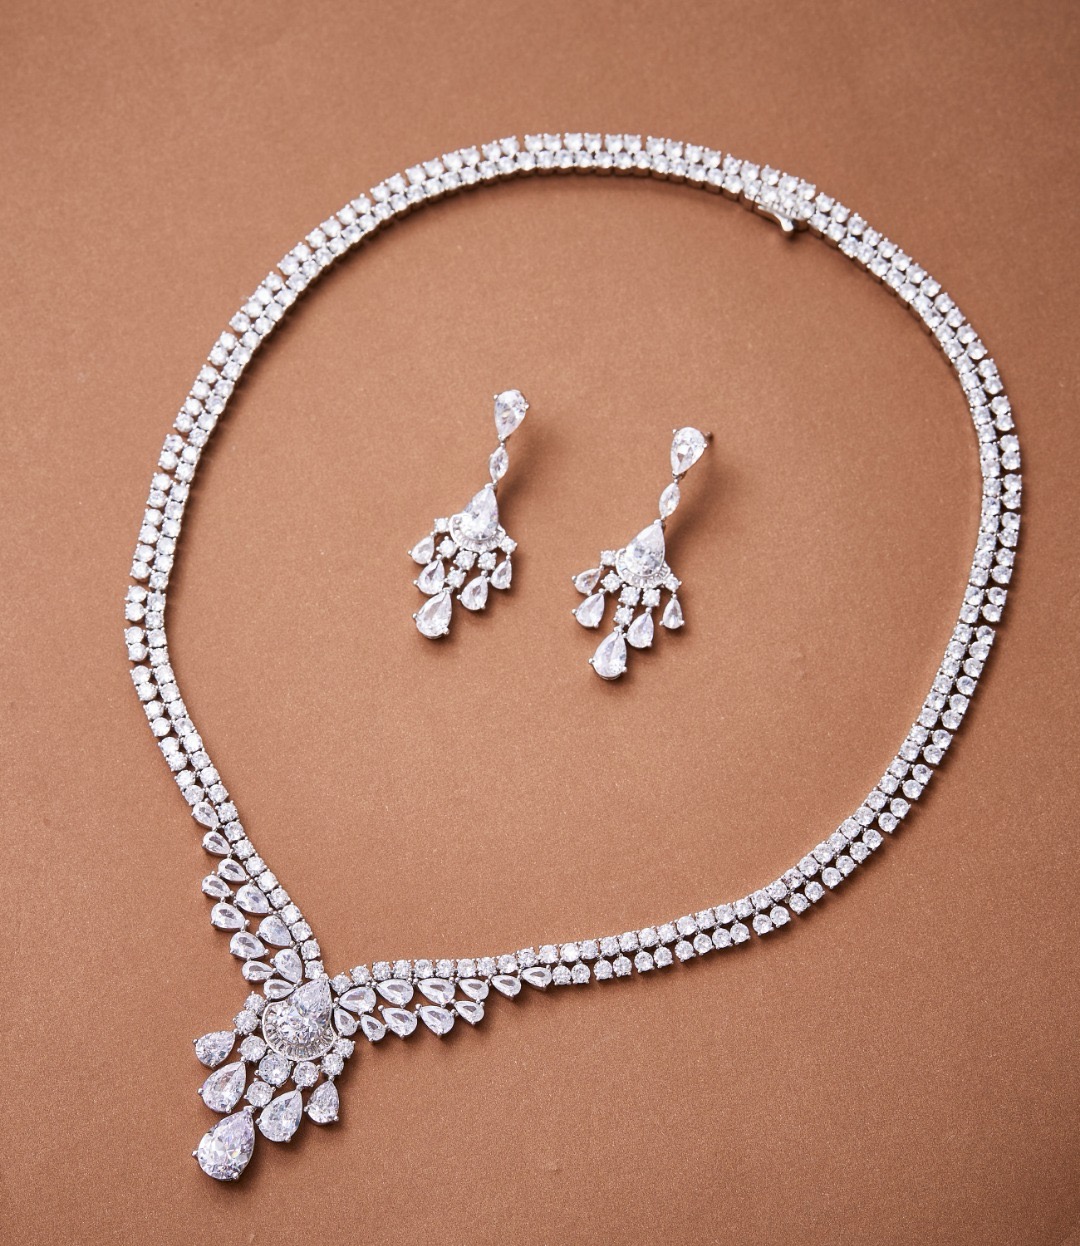 BVLGARI NECKLACE &Earrings CE13719